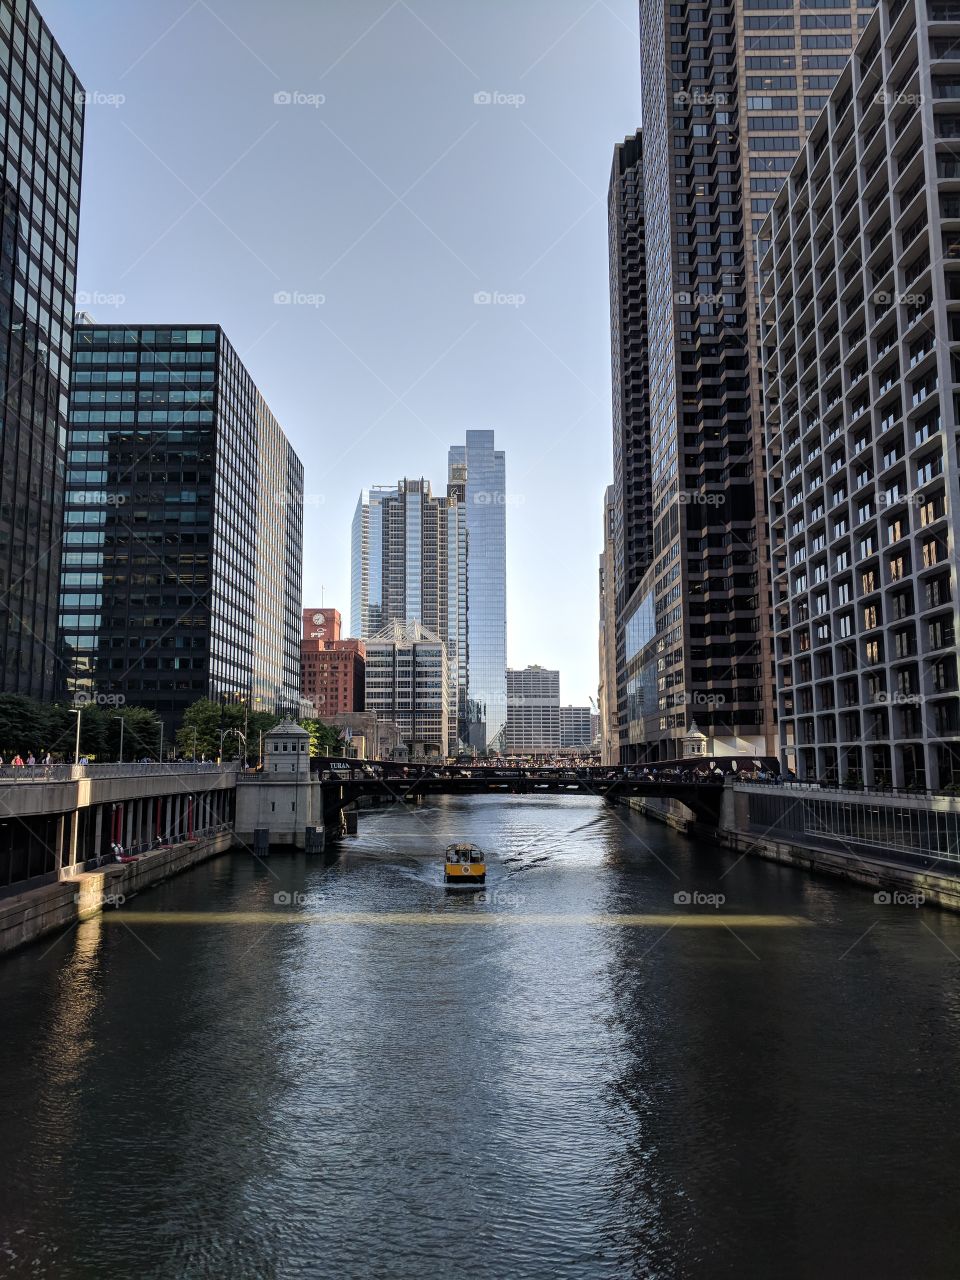 Chicago Loop Morning Commute